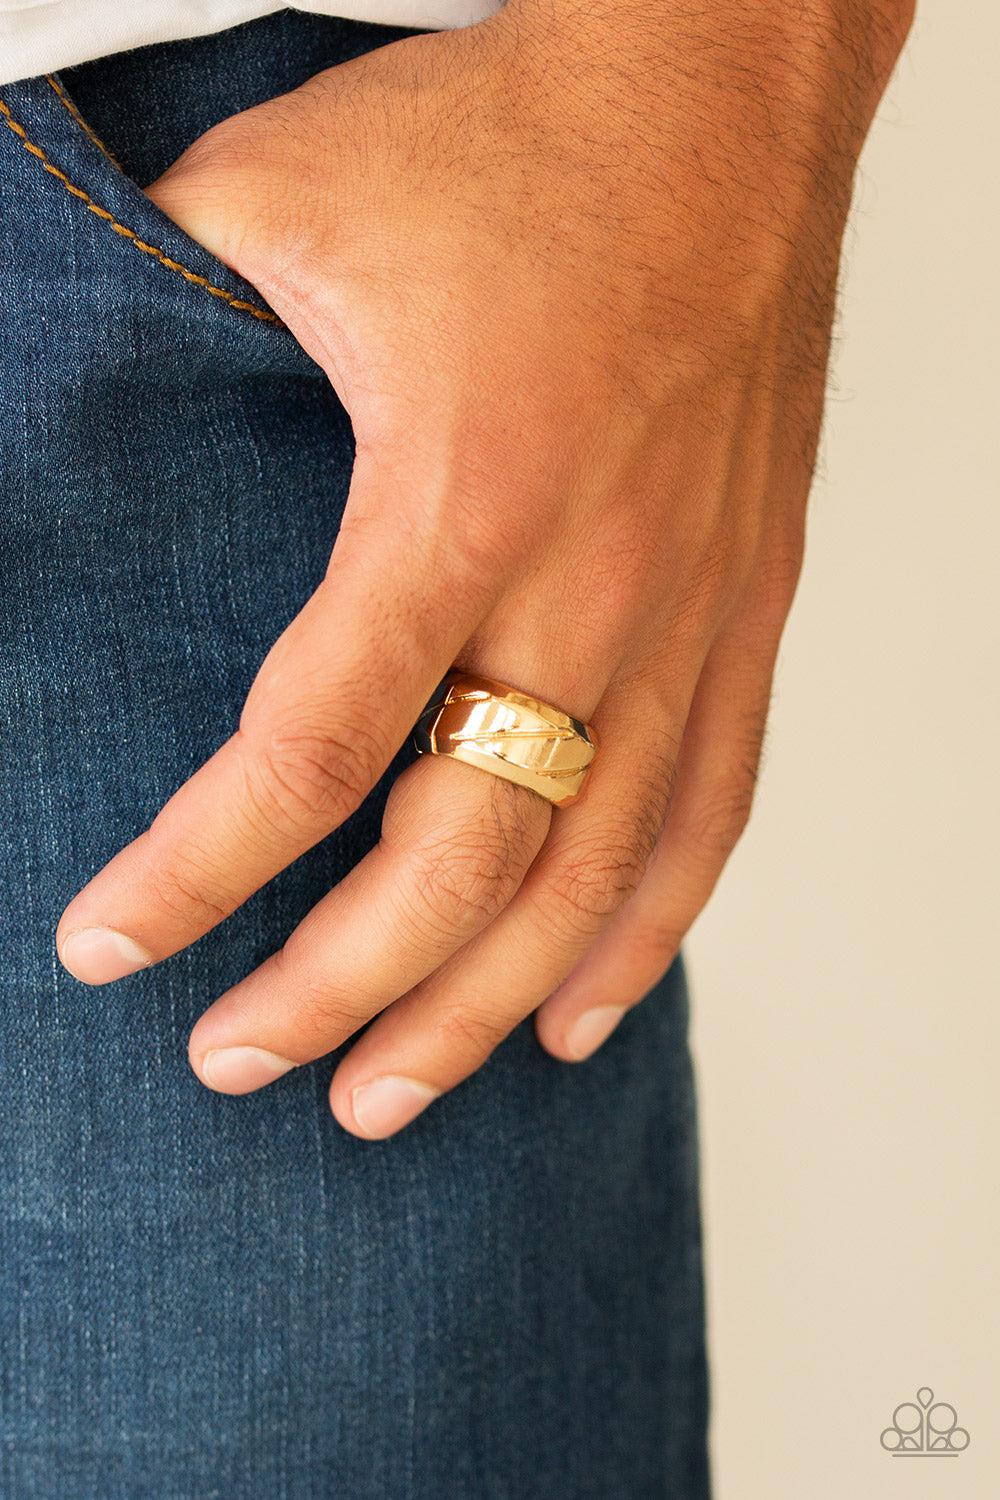 Sideswiped Men's Gold Ring - Paparazzi Accessories- lightbox - CarasShop.com - $5 Jewelry by Cara Jewels